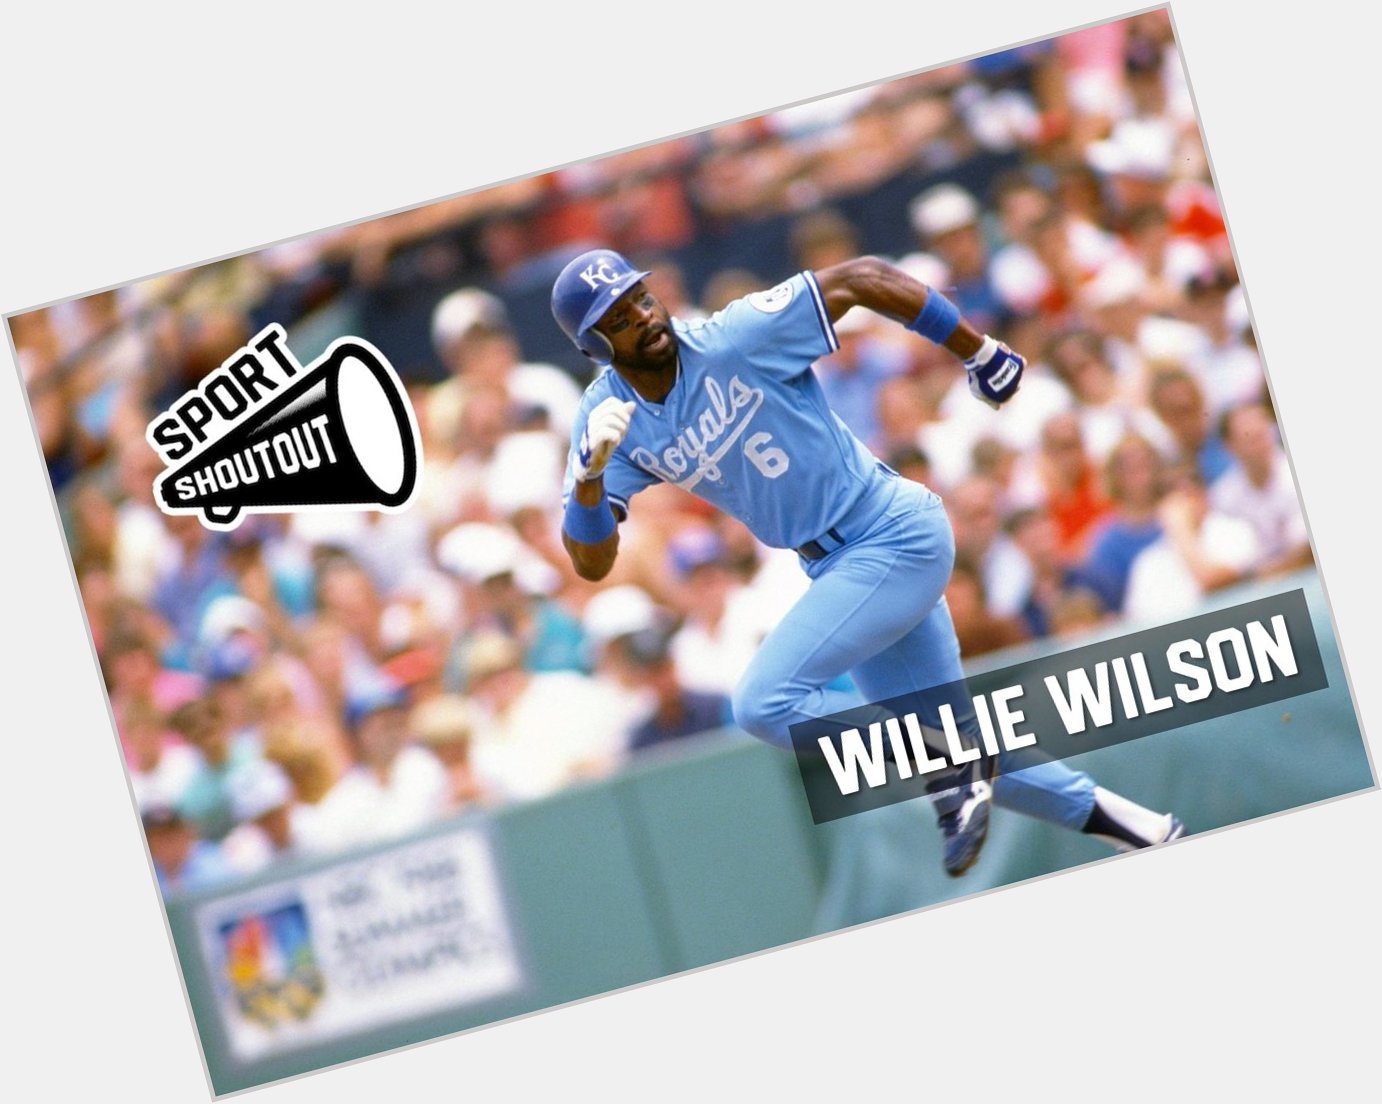 Sport Shoutout would like to wish 2-time All Star and 1985 World Series Champion Willie Wilson a Happy Birthday! 